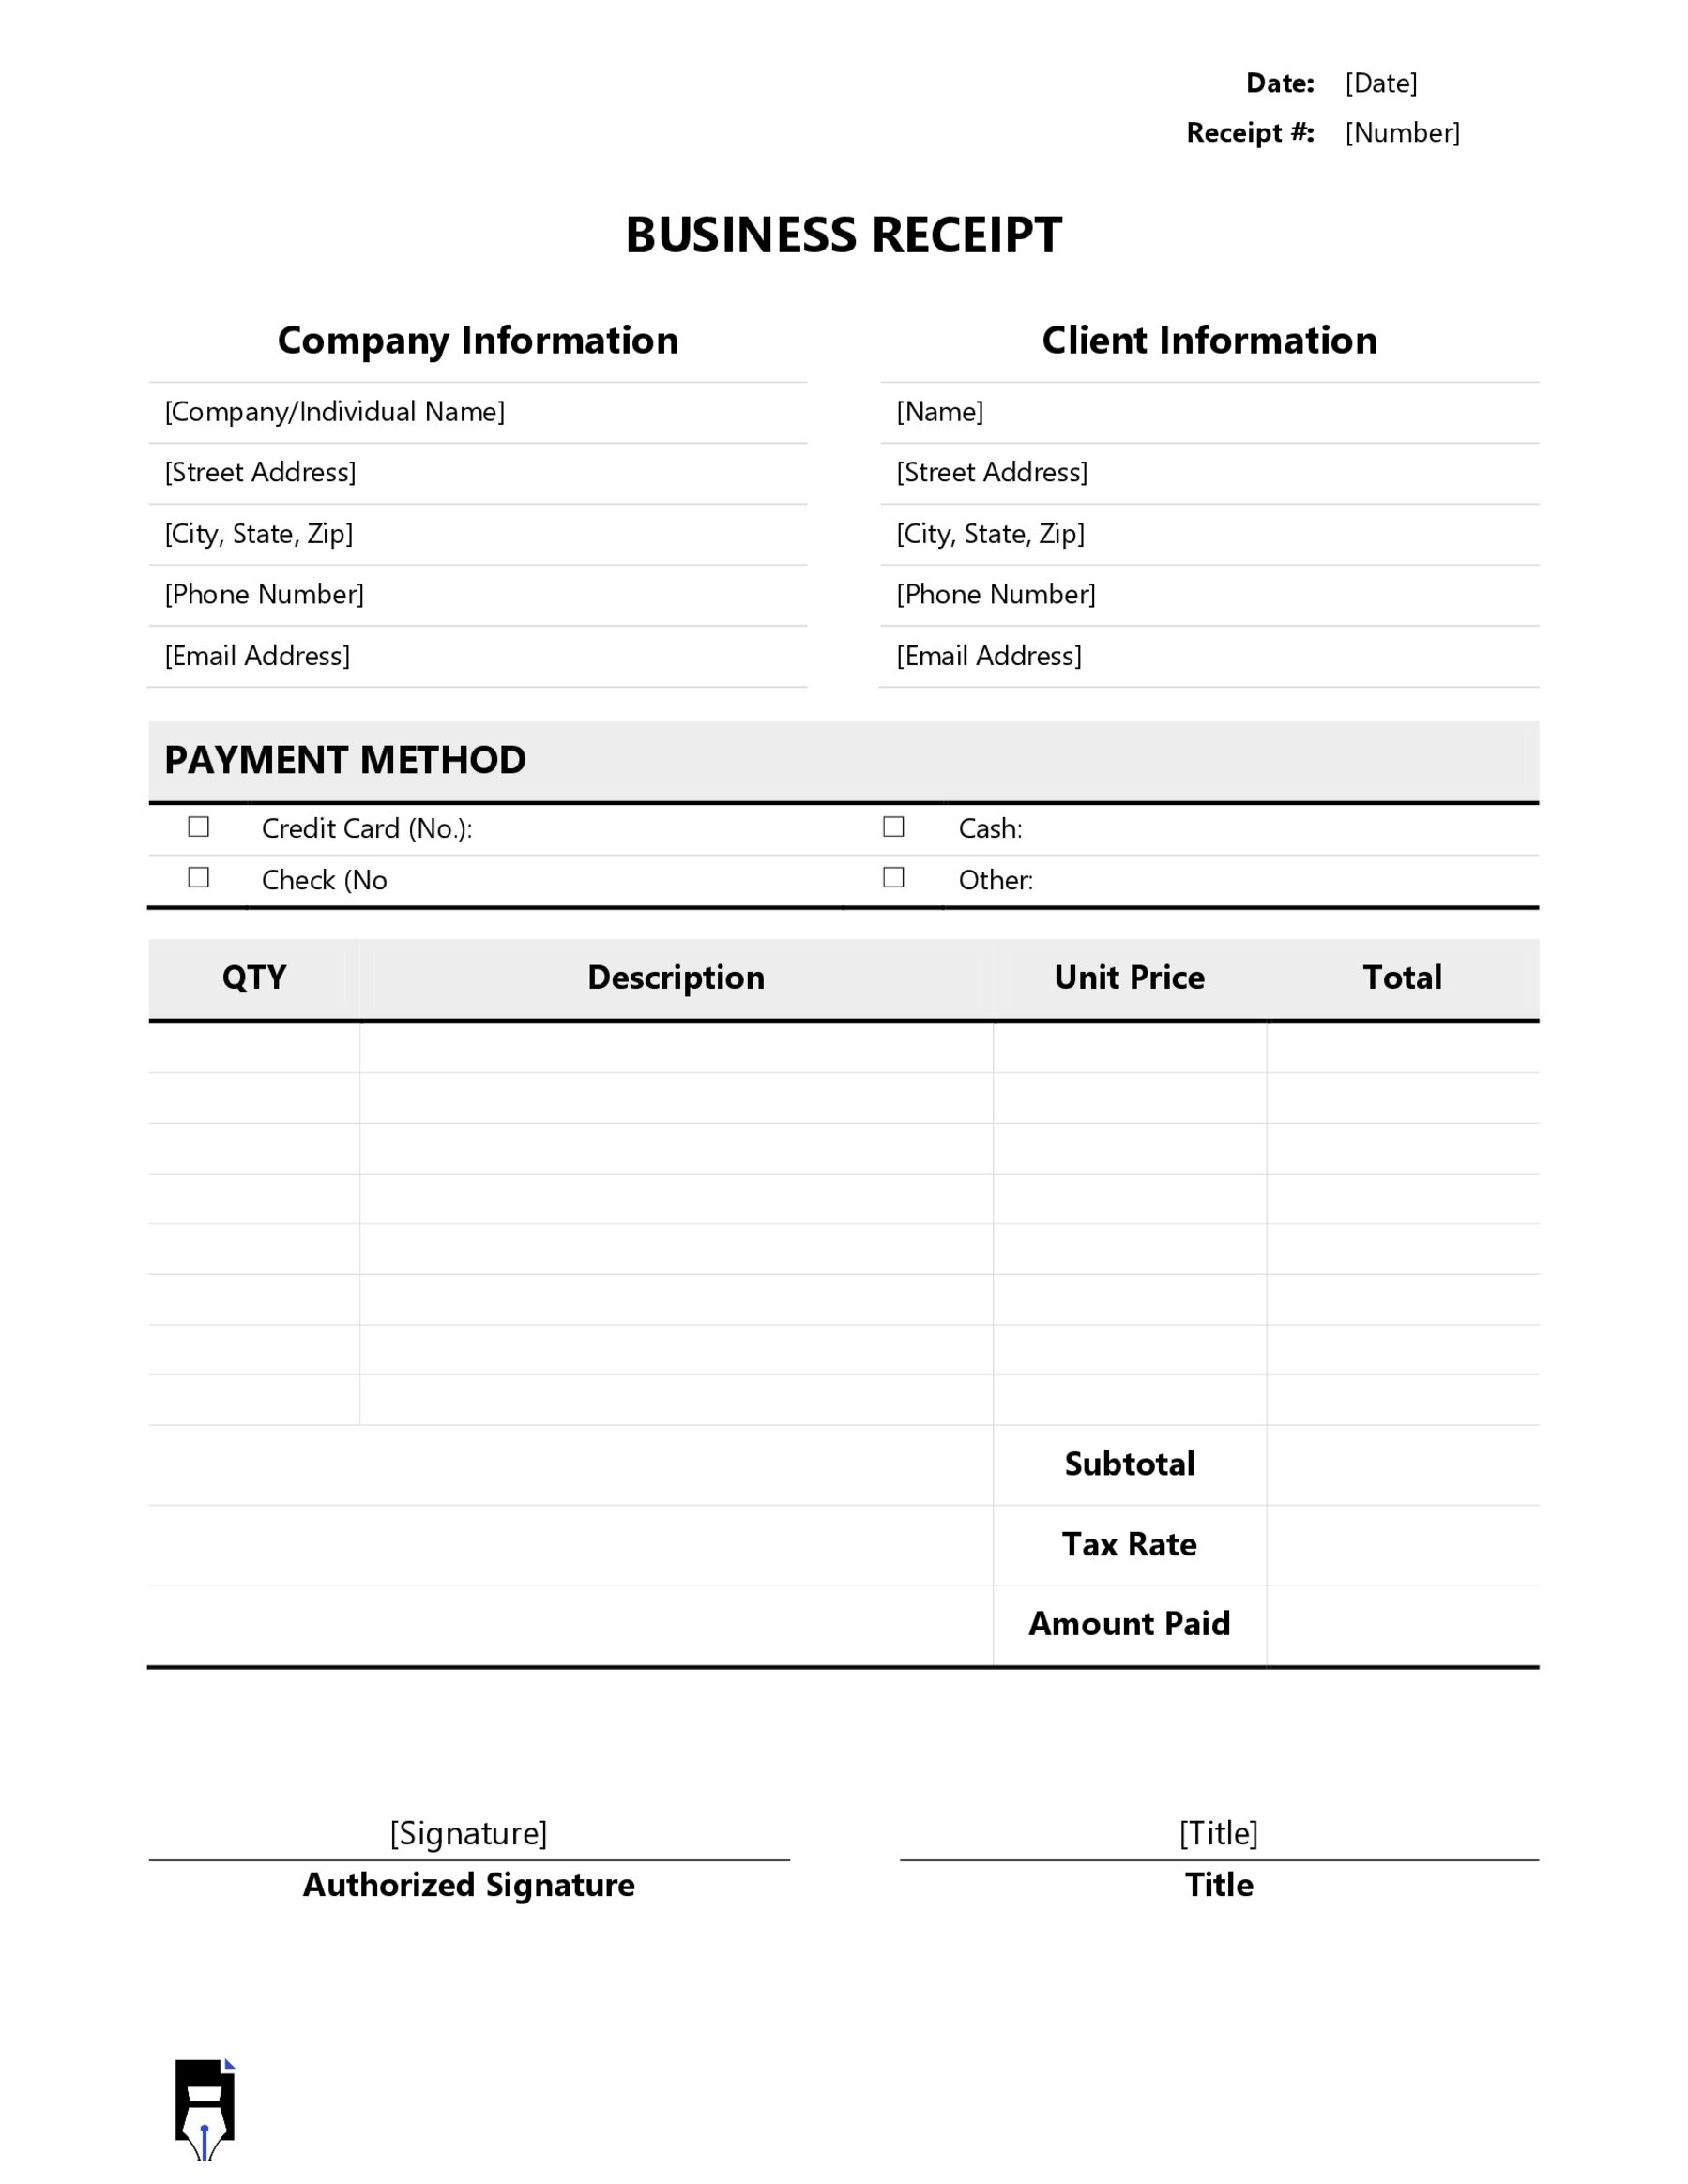 Free Sample Business Receipt Template in Word